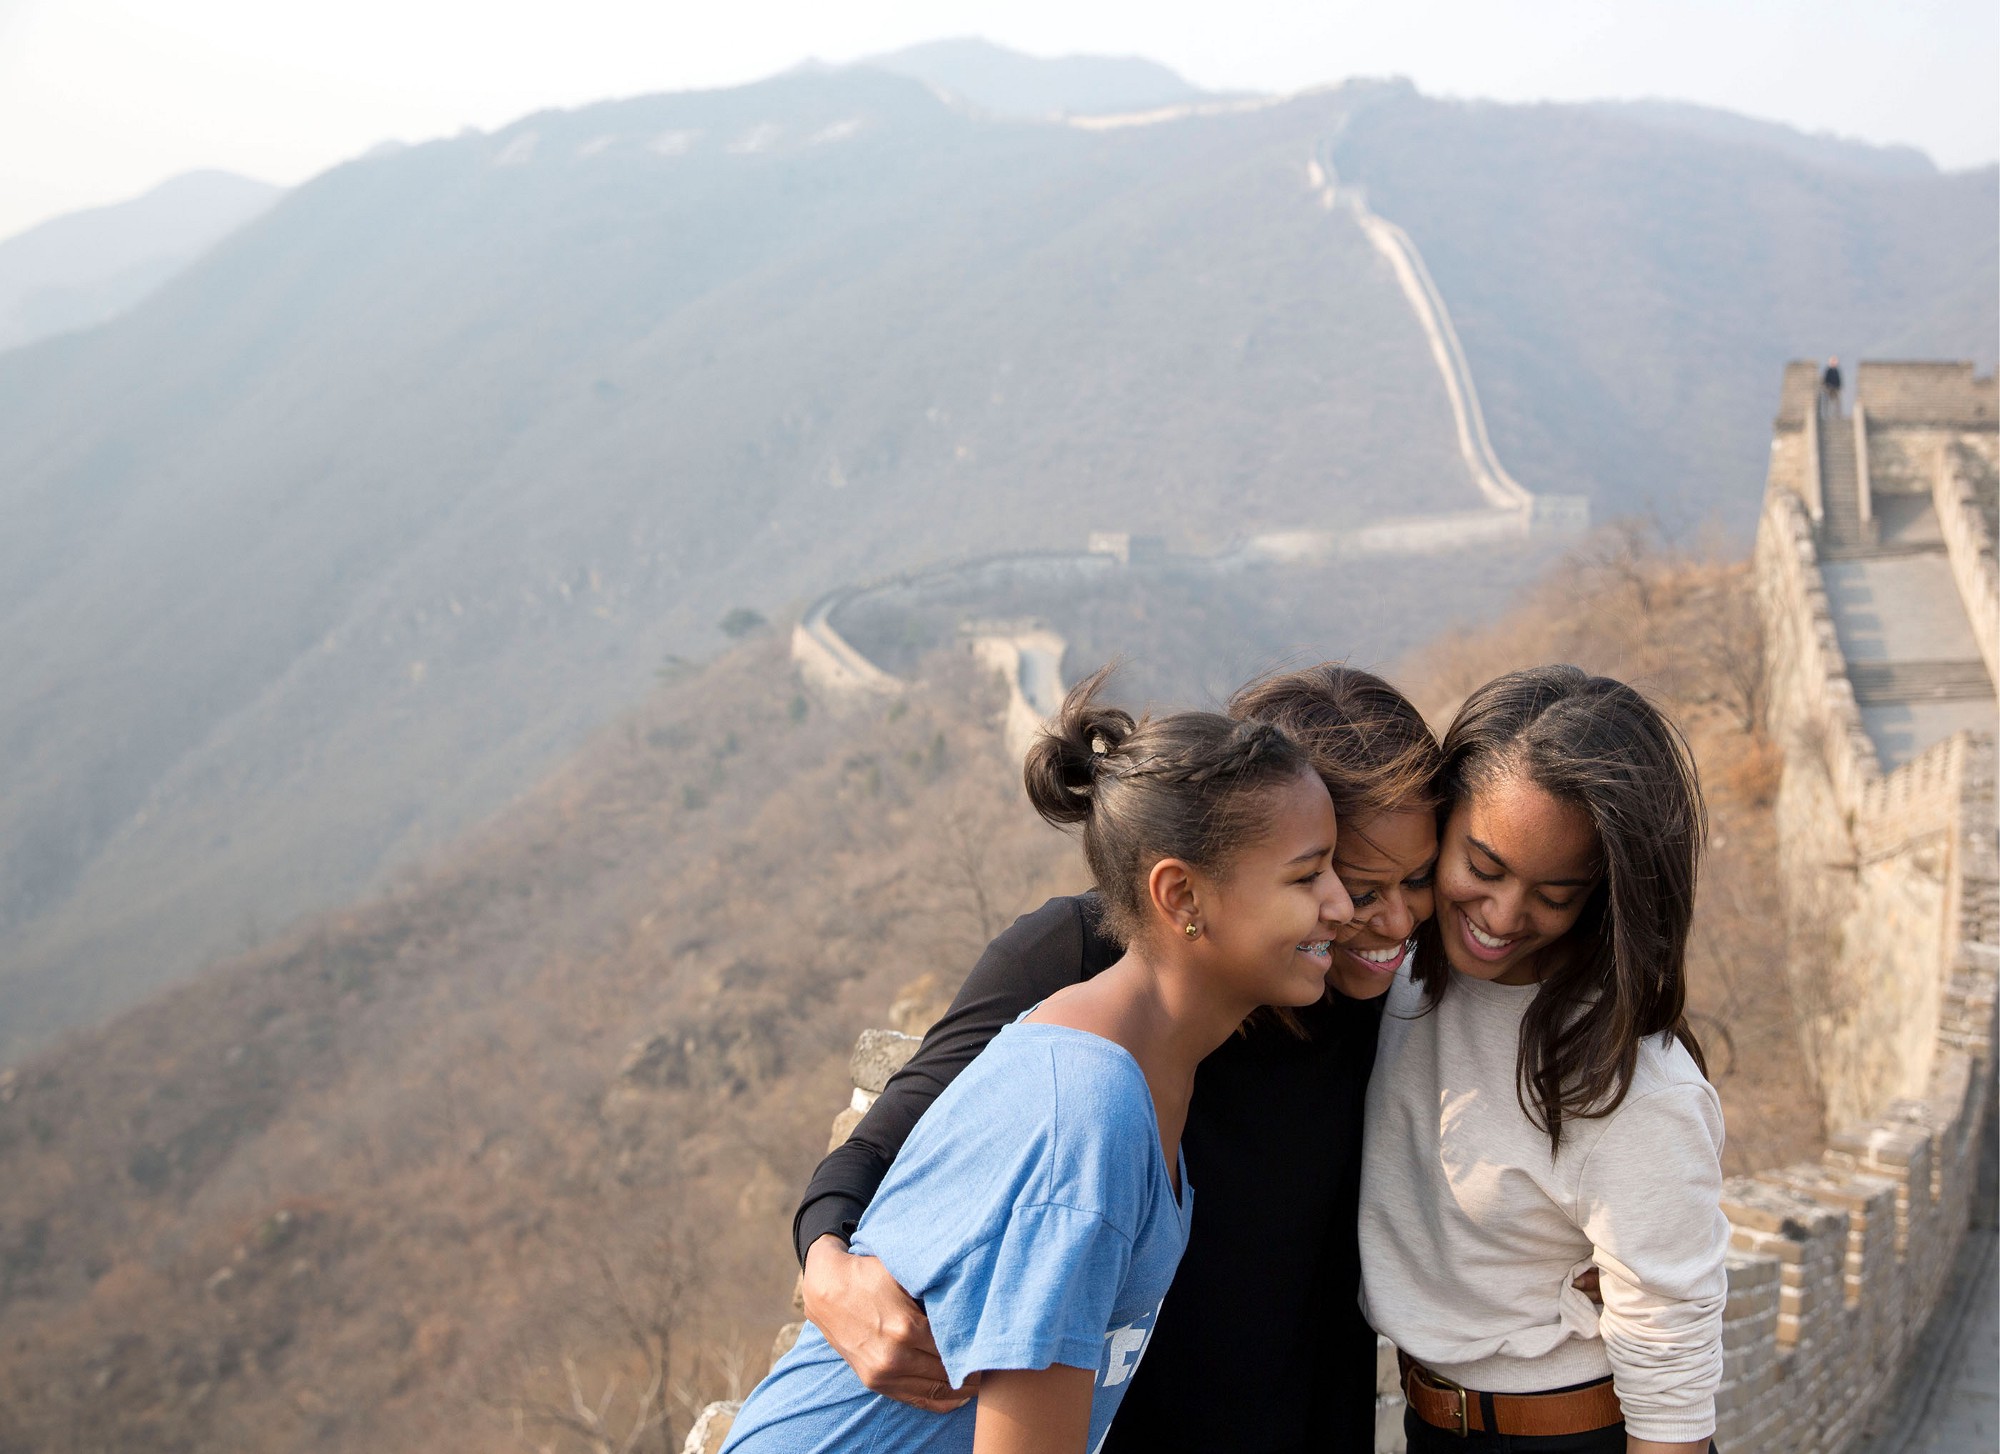 March 23, 2014. With Sasha and Malia at the Great Wall of China. (Official White House Photo by Amanda Lucidon)